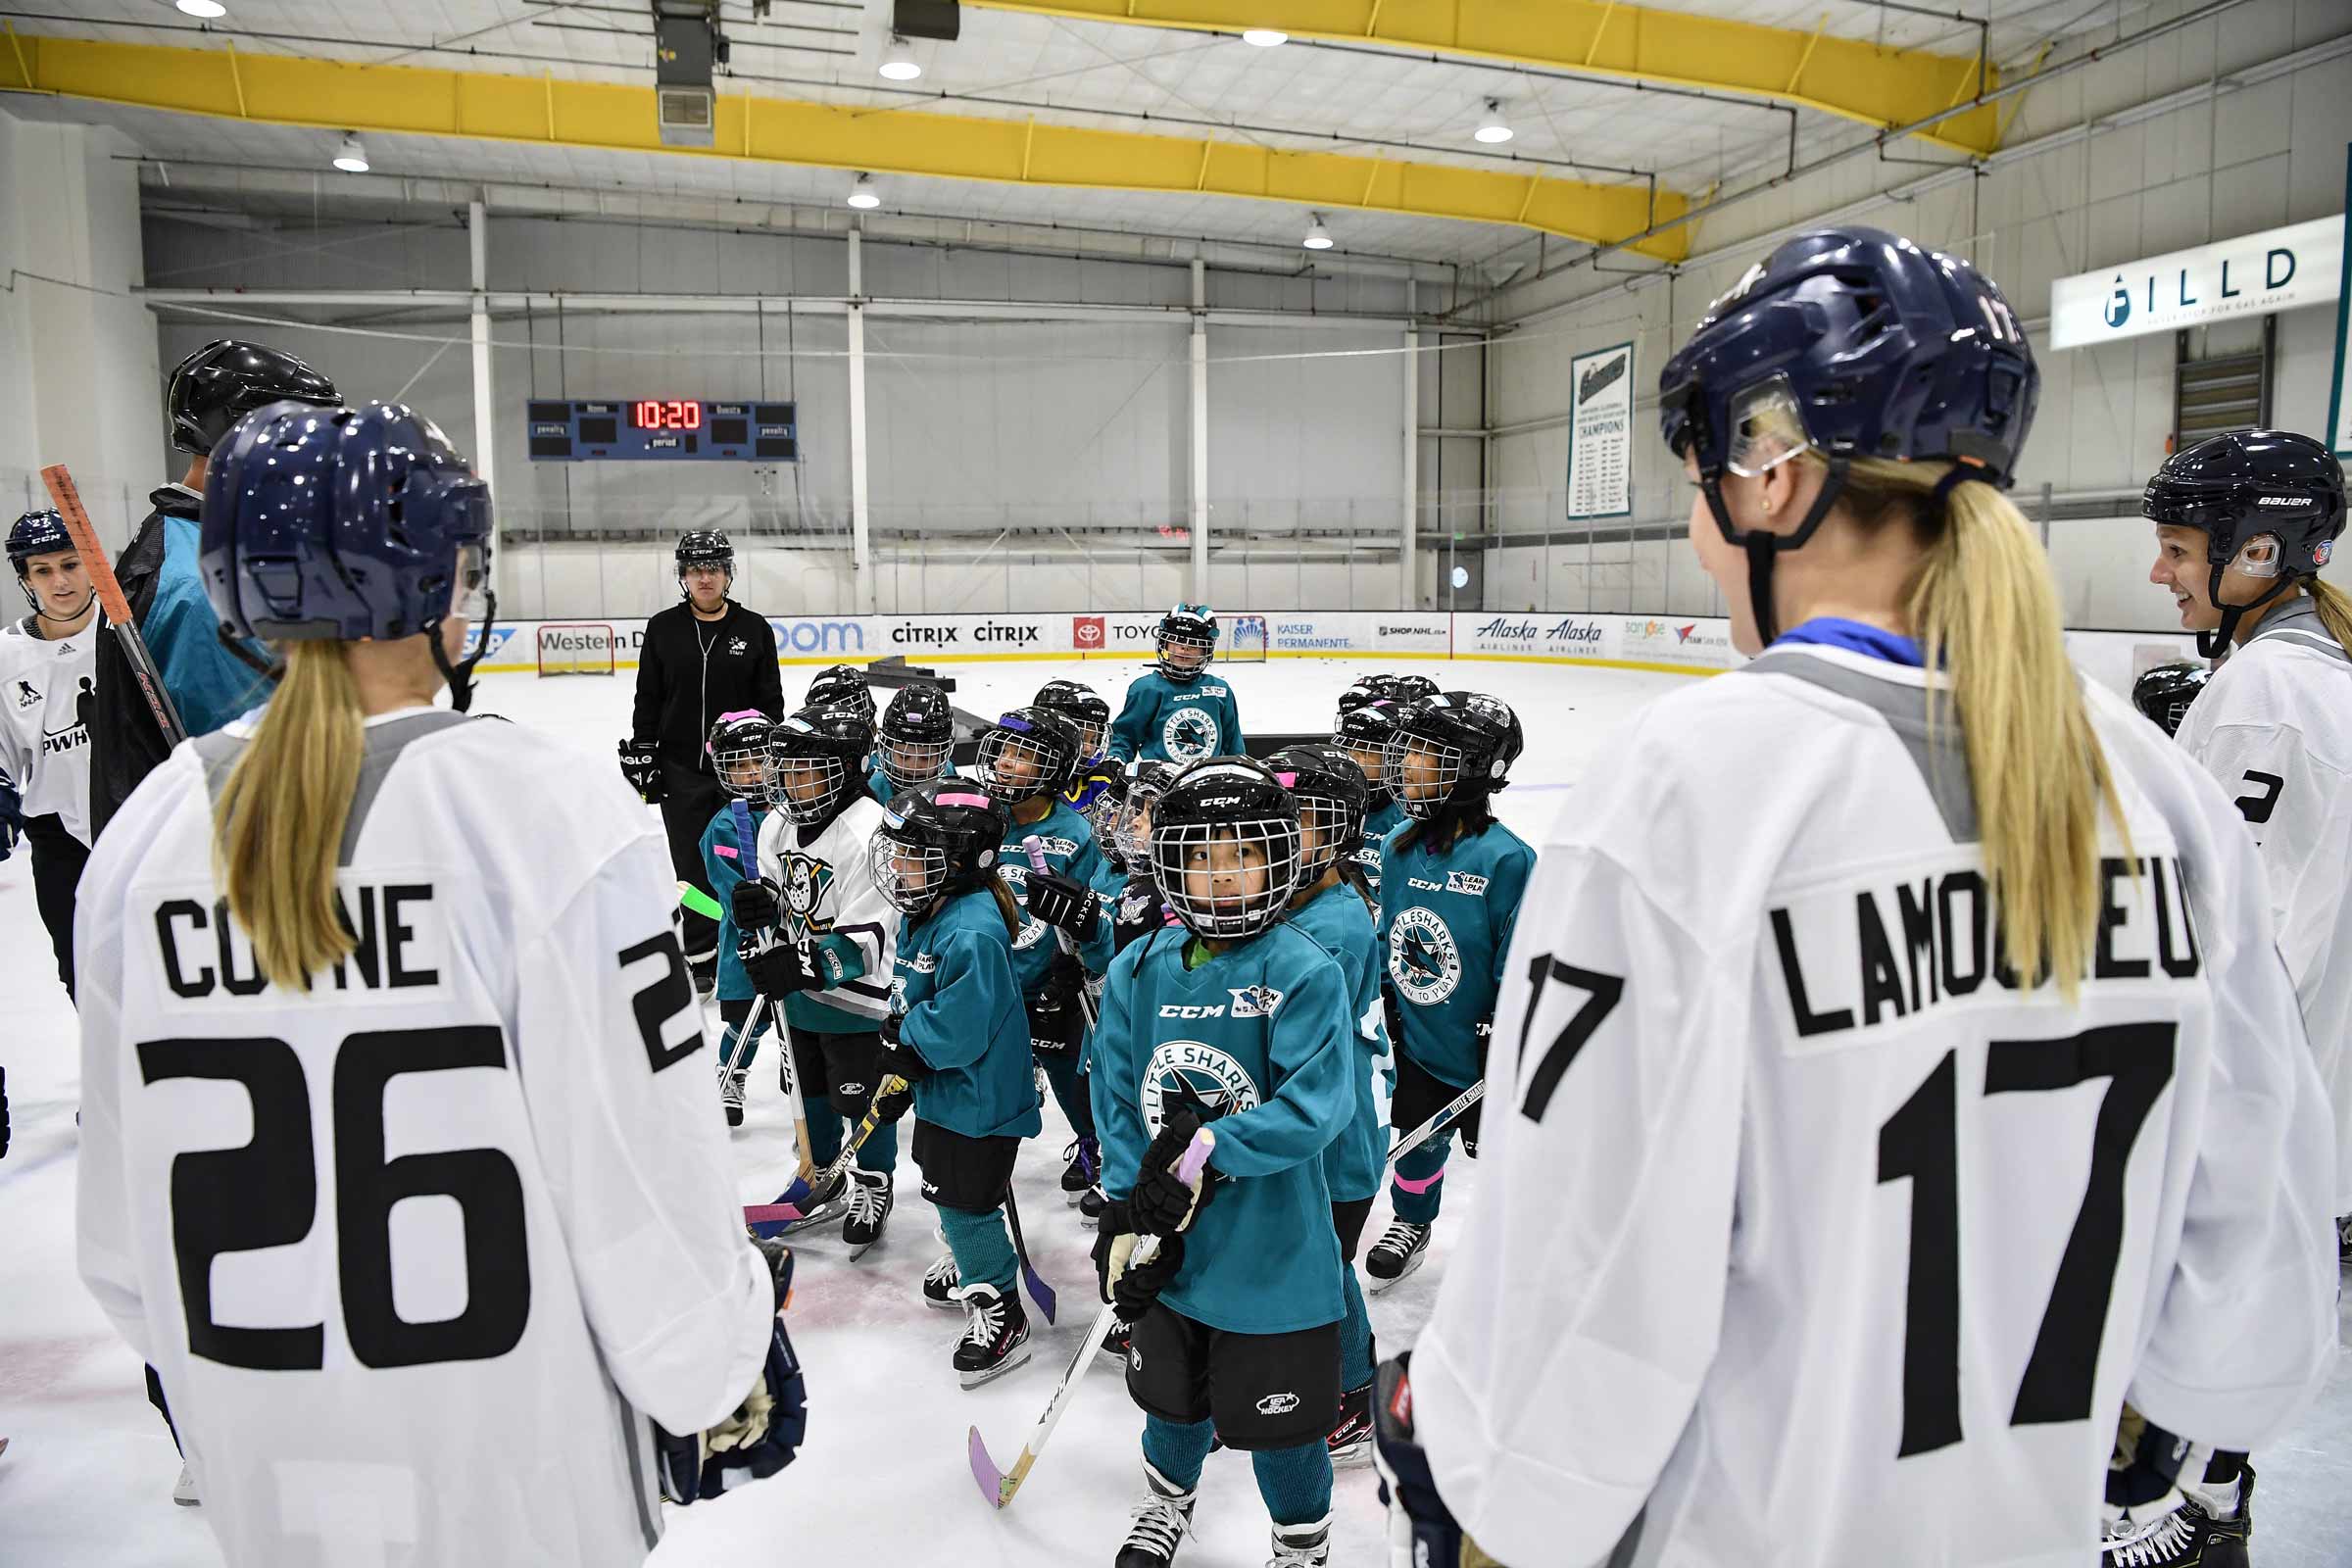 Kids wearing Little Sharks jerseys who are a part of the kid's league on the ice in between play surrounded by women hockey instructors